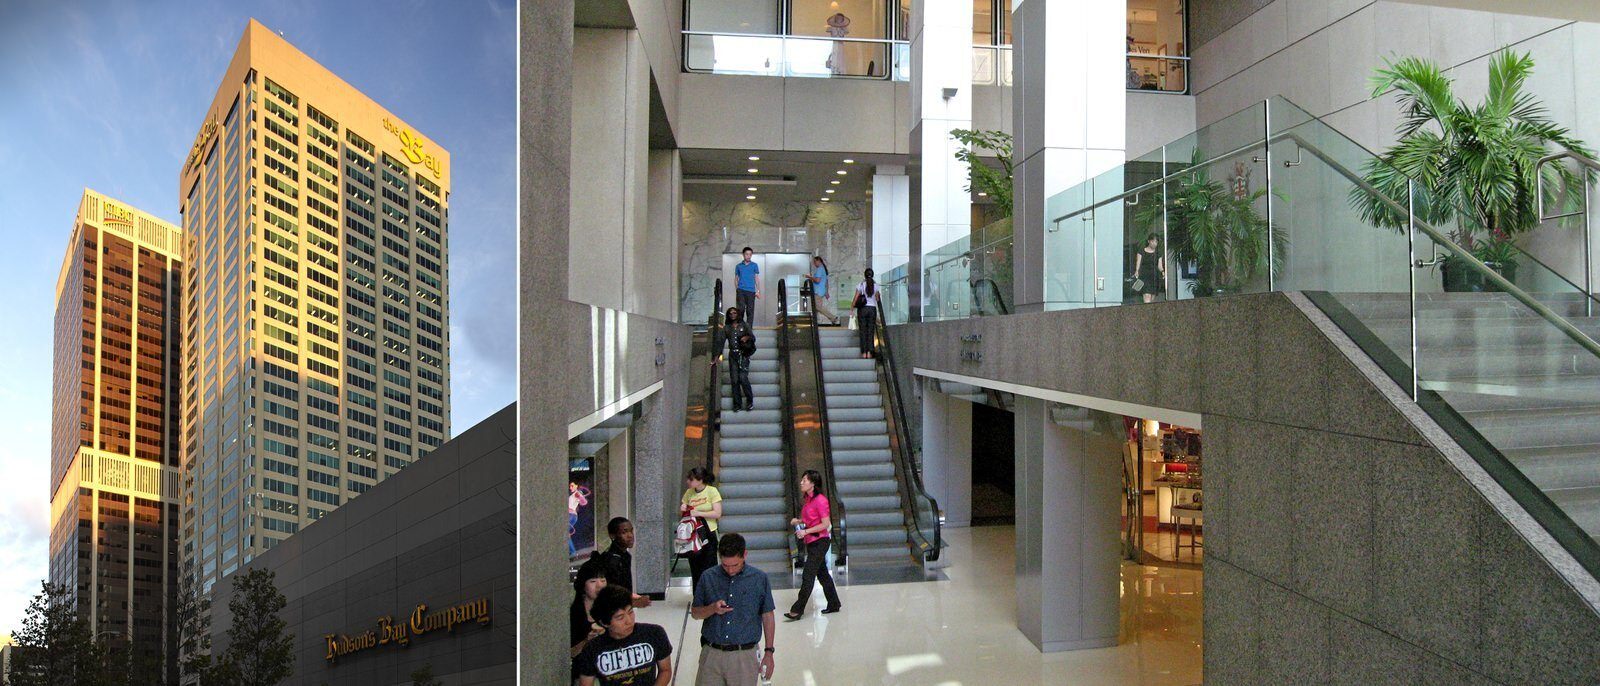 Banner image showing the exterior of The Bay and an indoor escalator.